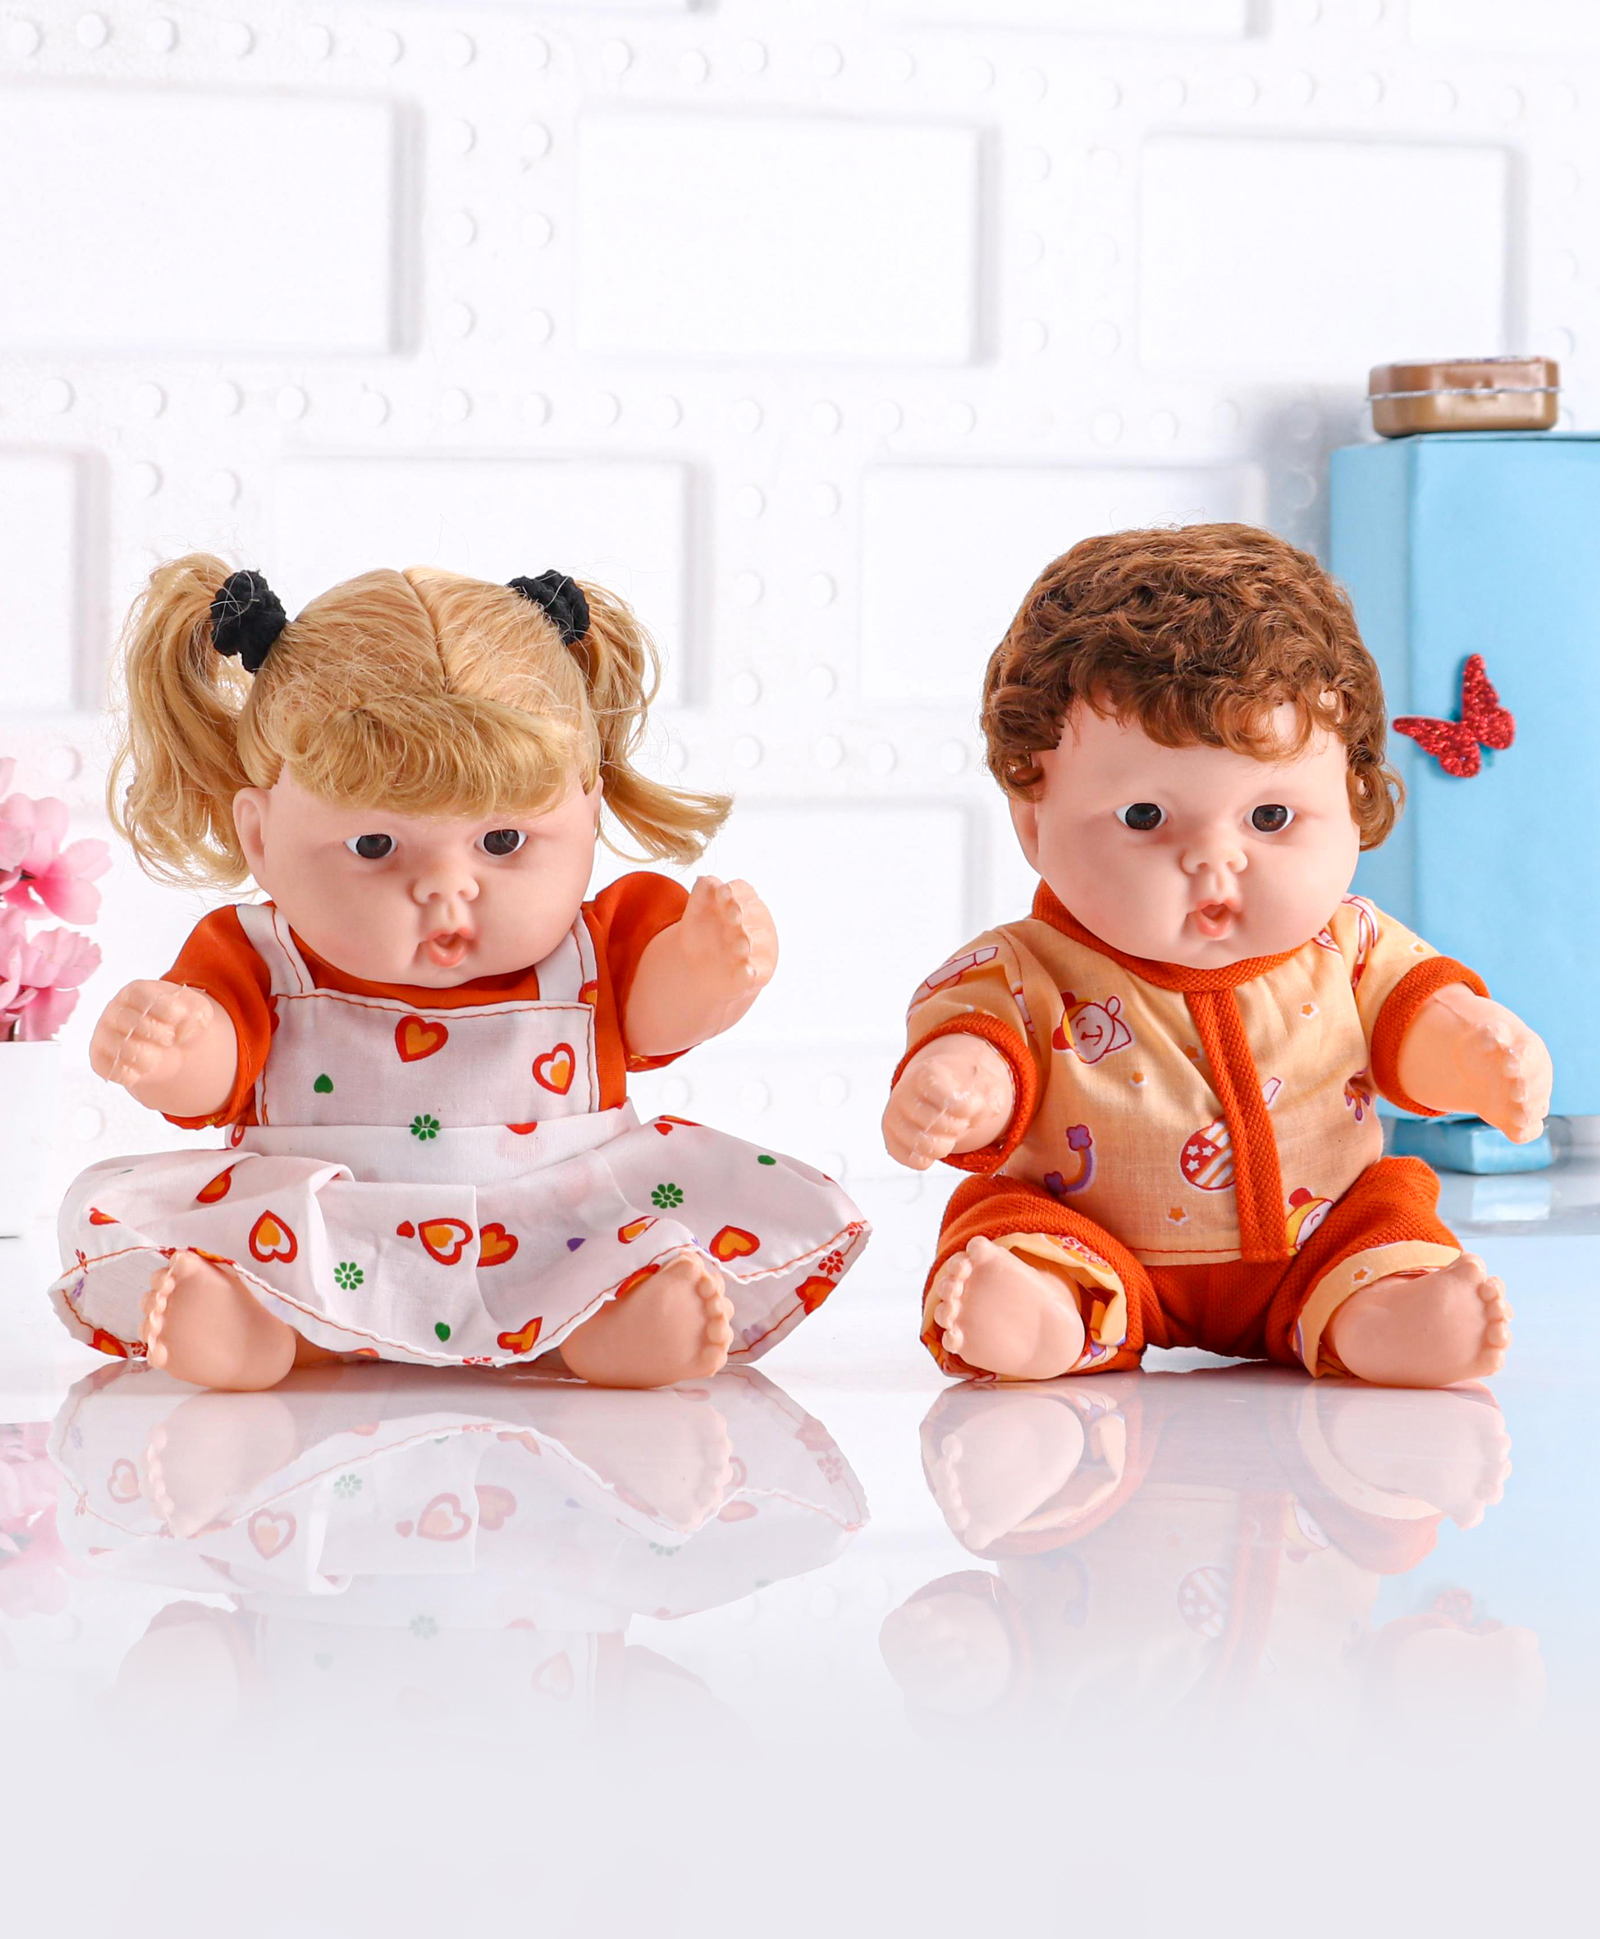 Poshampaa Baby Doll Pack of 2 - Height 14 cm (Colour and Print May Vary)  Online India, Buy Dolls and Dollhouses for (3-8 Years) at FirstCry.com -  11718596